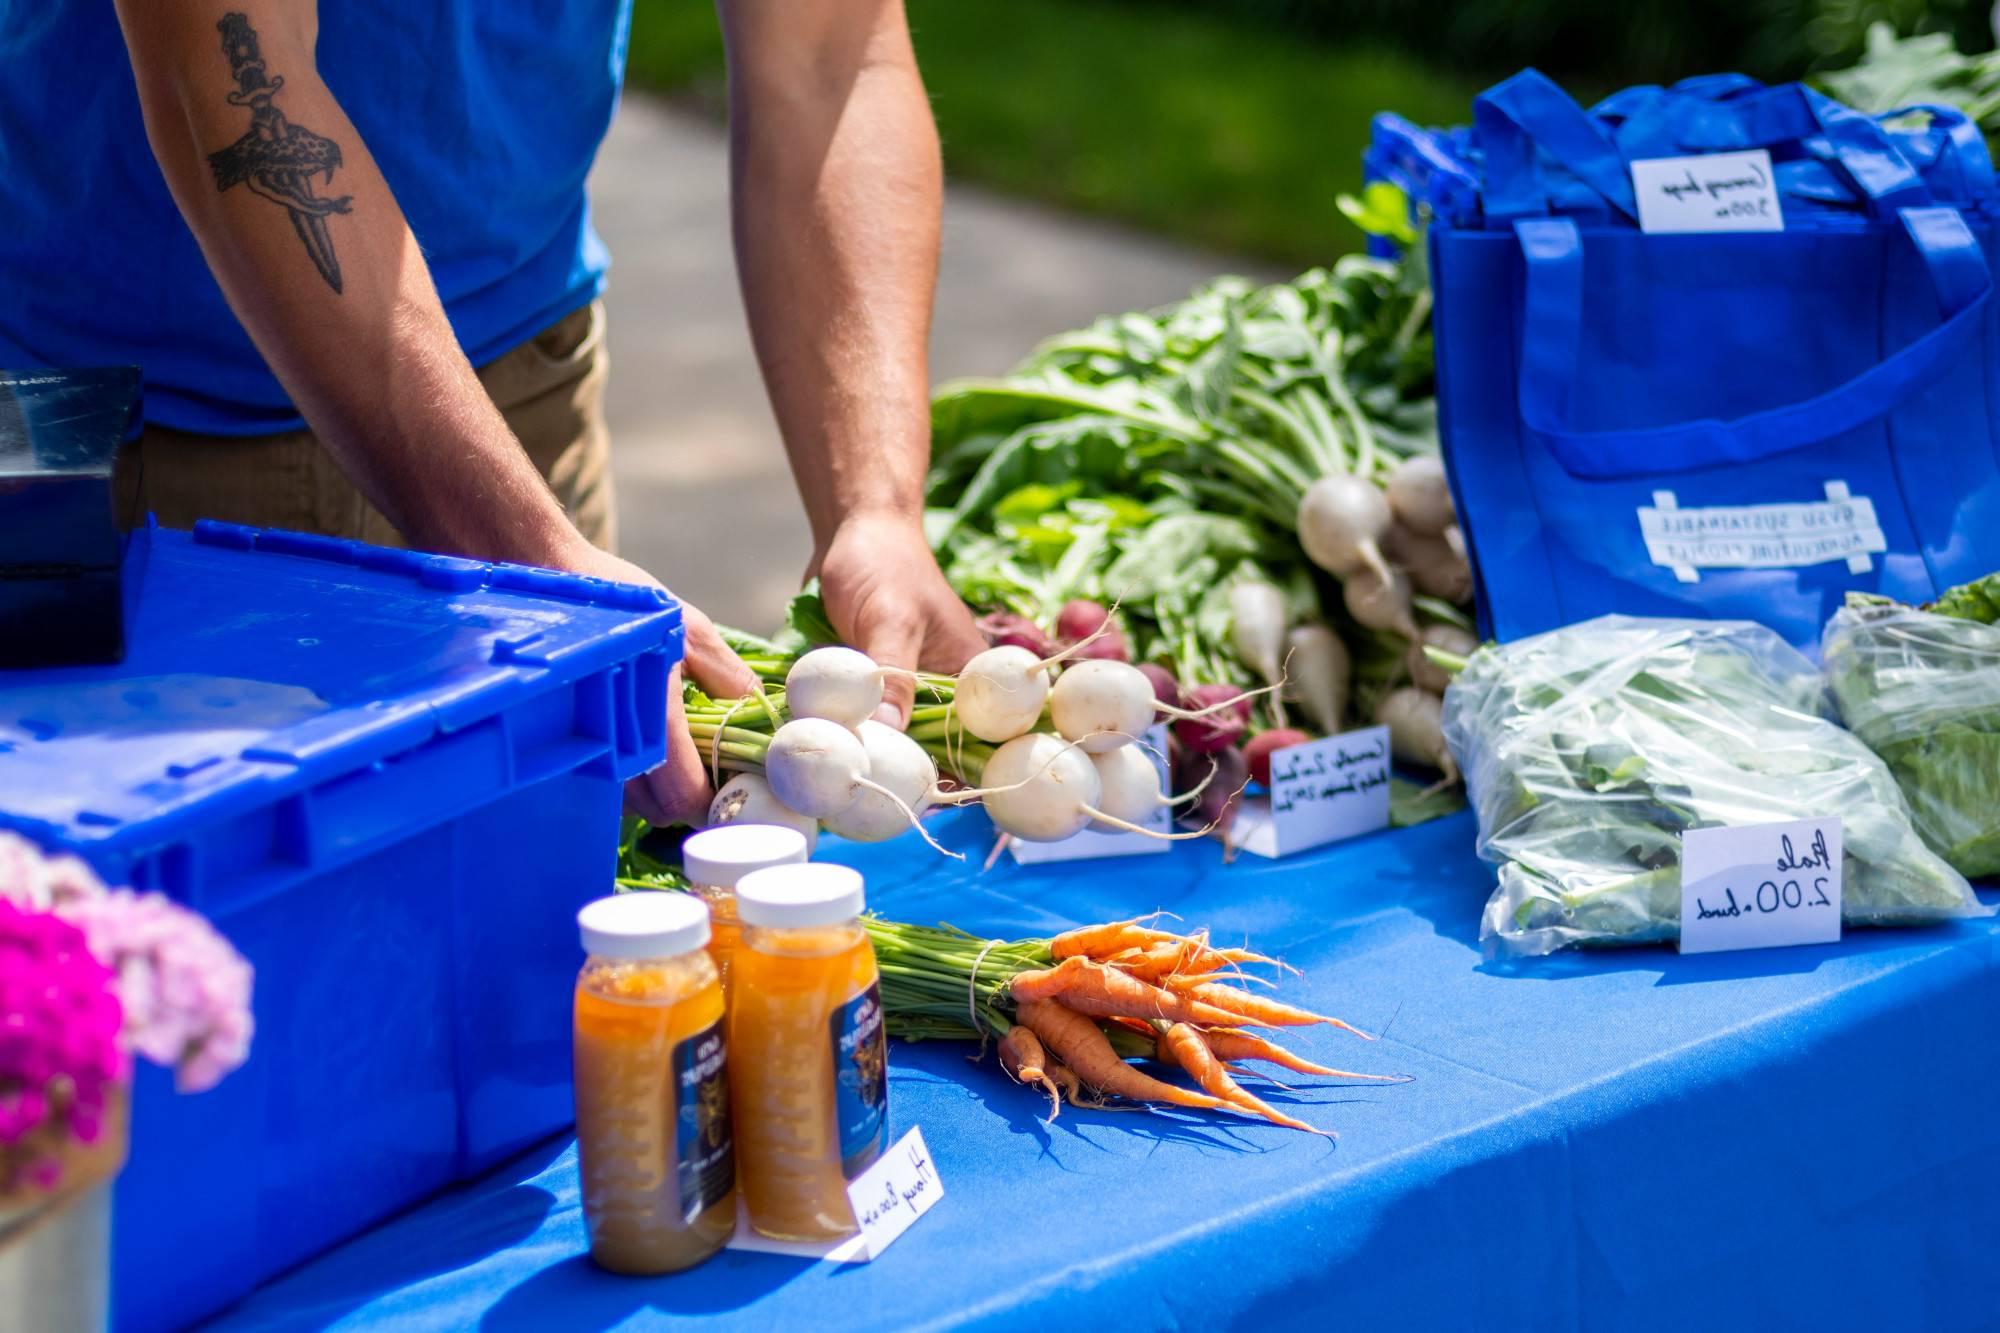 A table at the Farmers Market holding veggies that were grown on the Sustainable Agriculture Project farm at GVSU, and honey from the GVSU Beekeepers Club